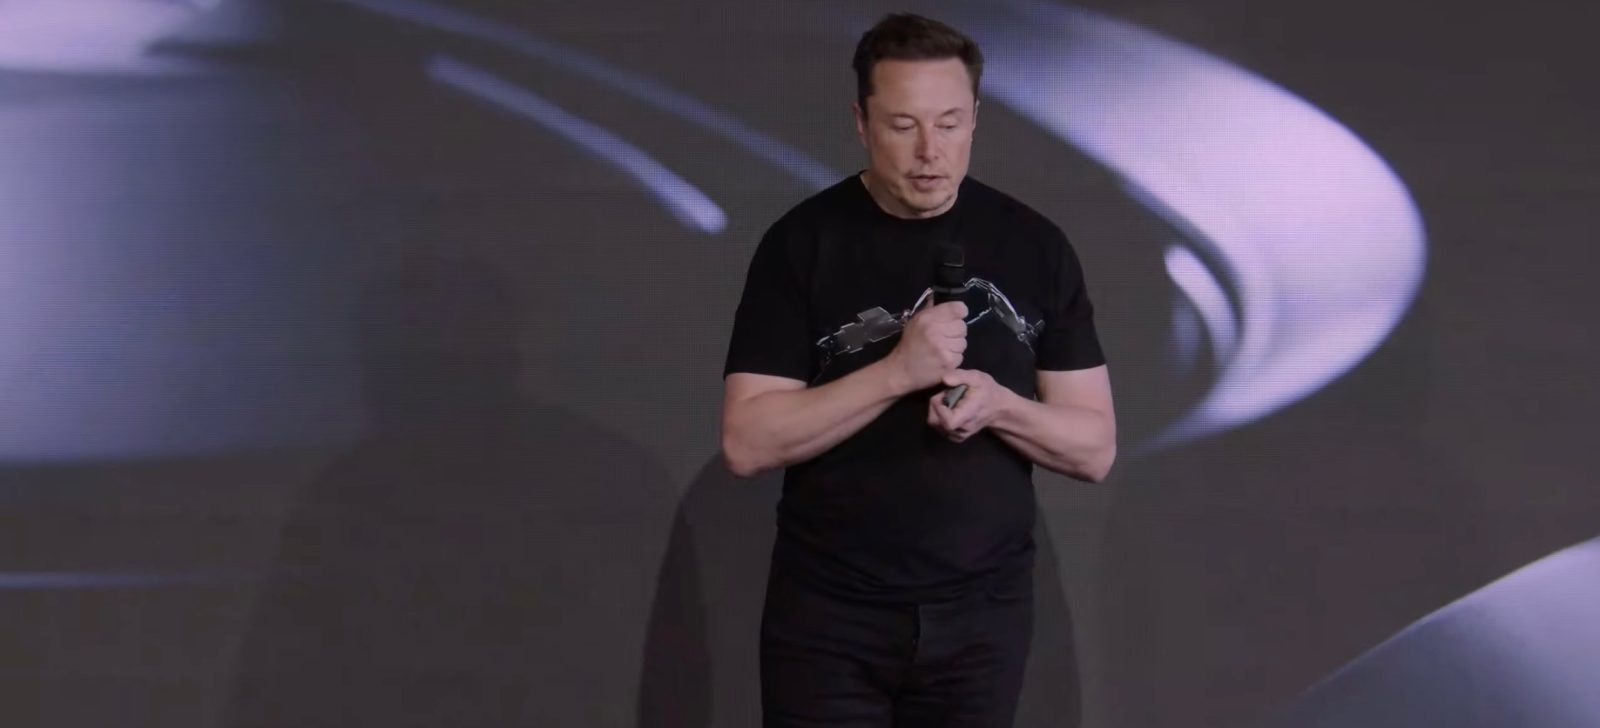 Elon Musk predicts some companies will go bankrupt within 12